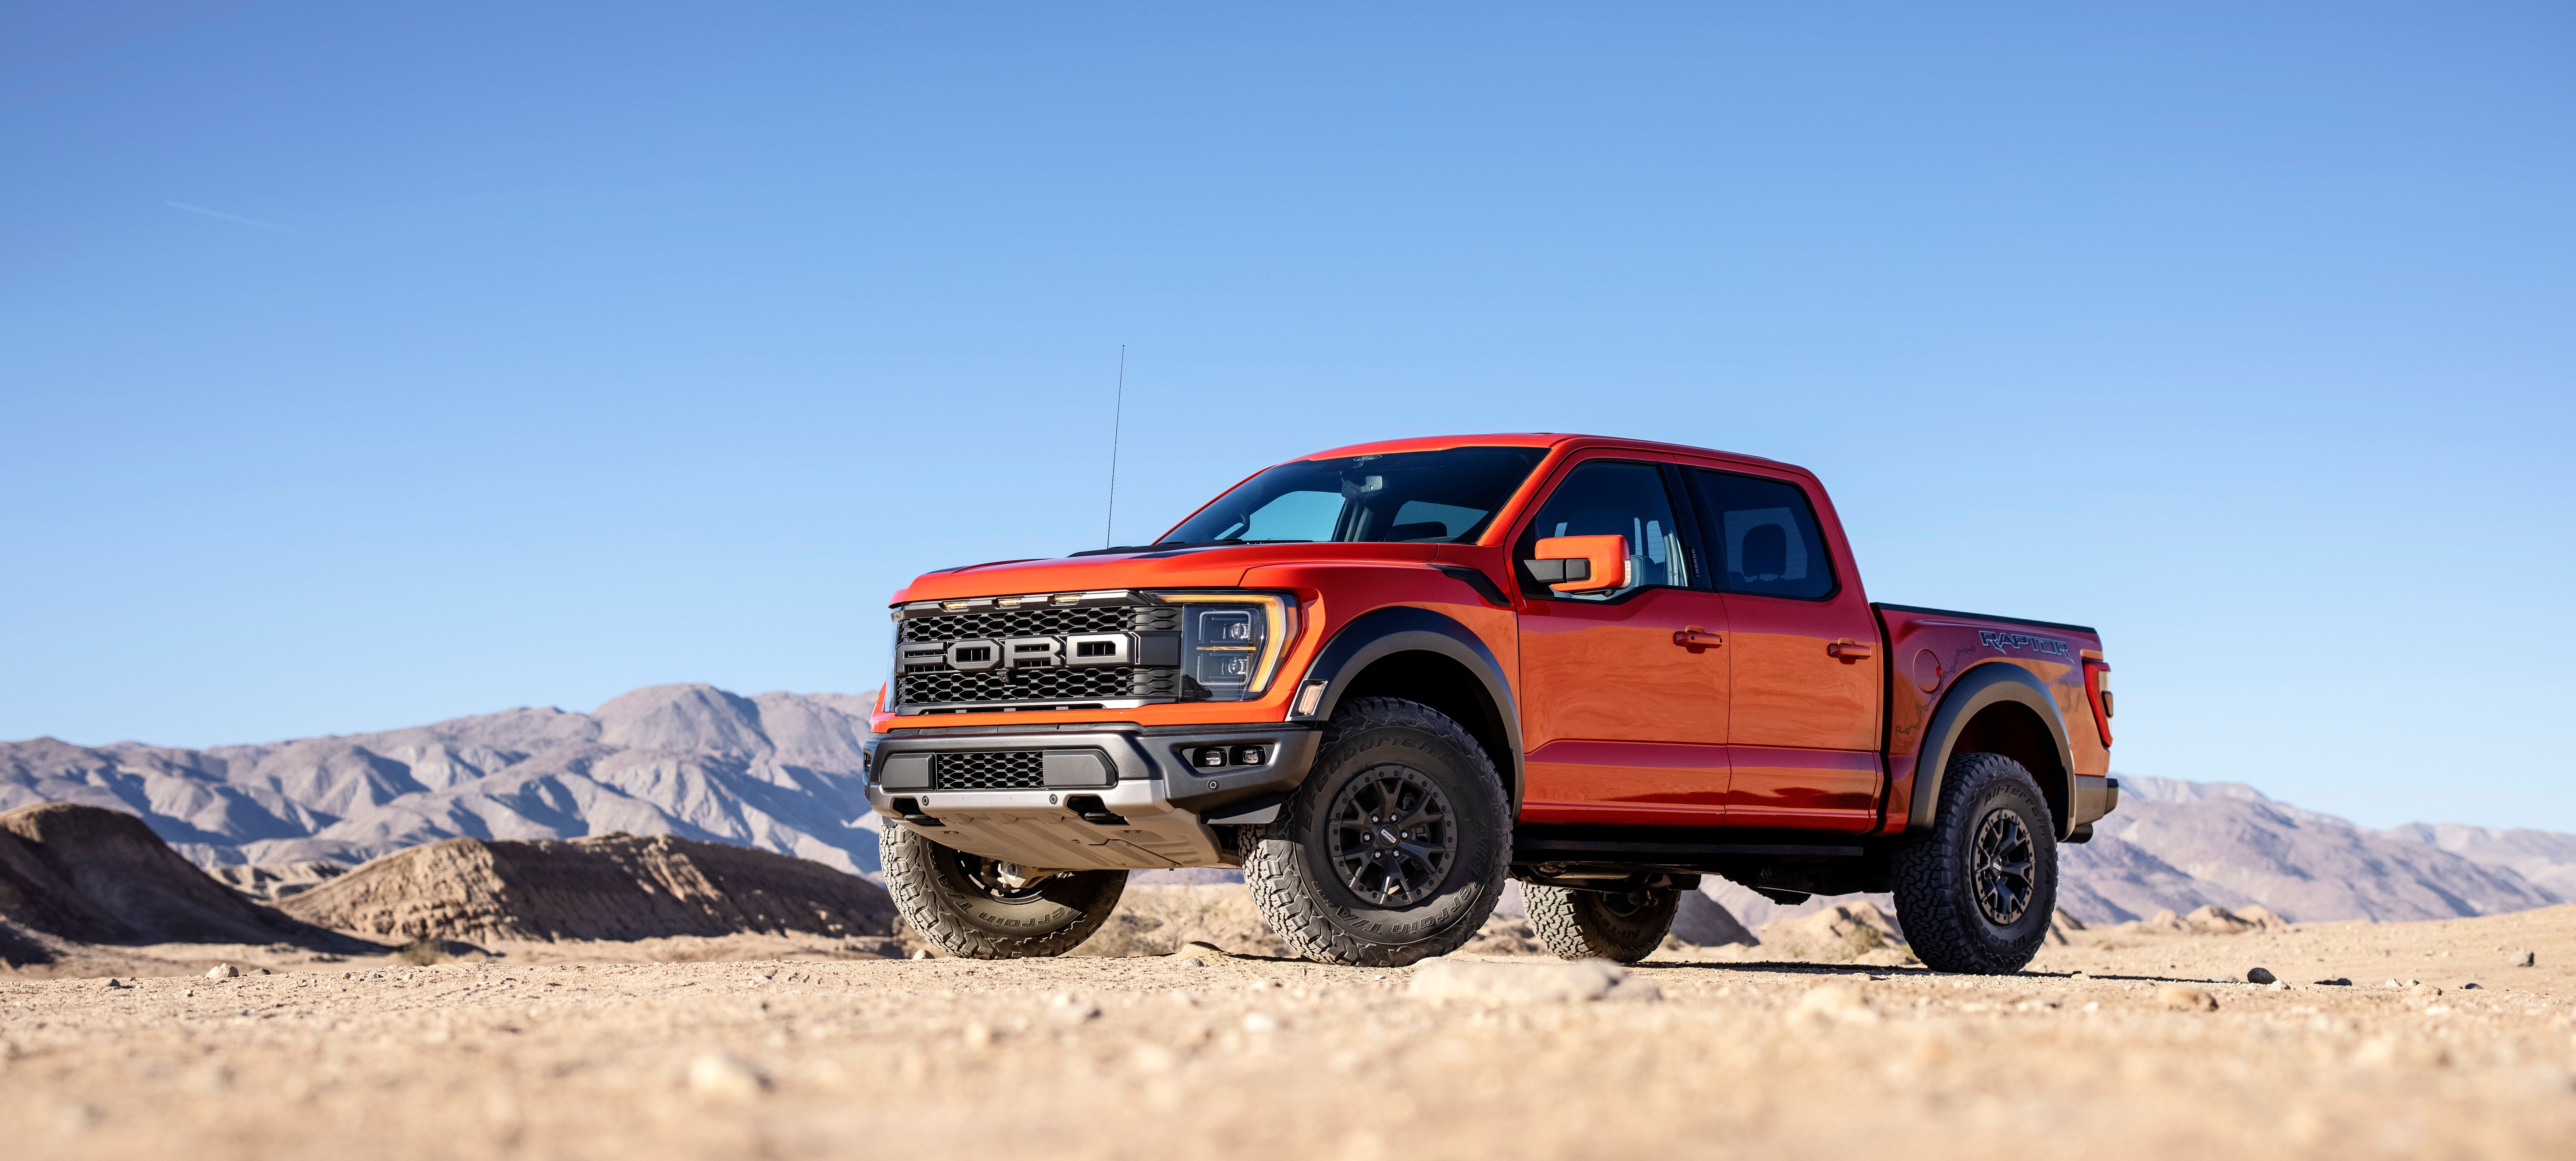 2022 The 2021 F-150 Raptor Doesn't Give You The Same Bang For Your Buck Anyway